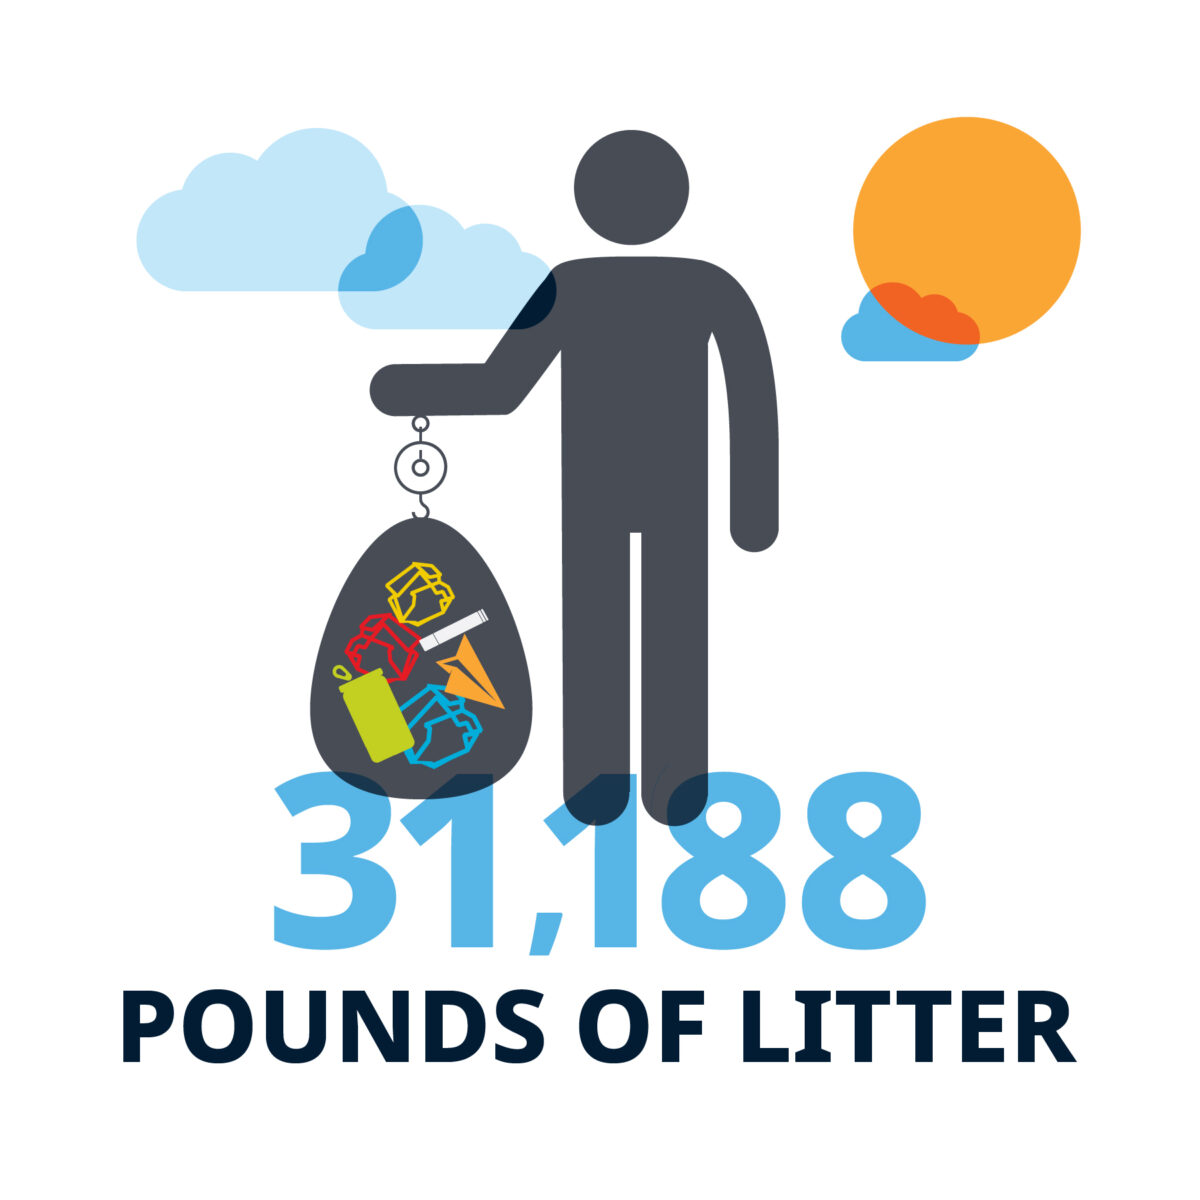 31,188 pounds of litter.